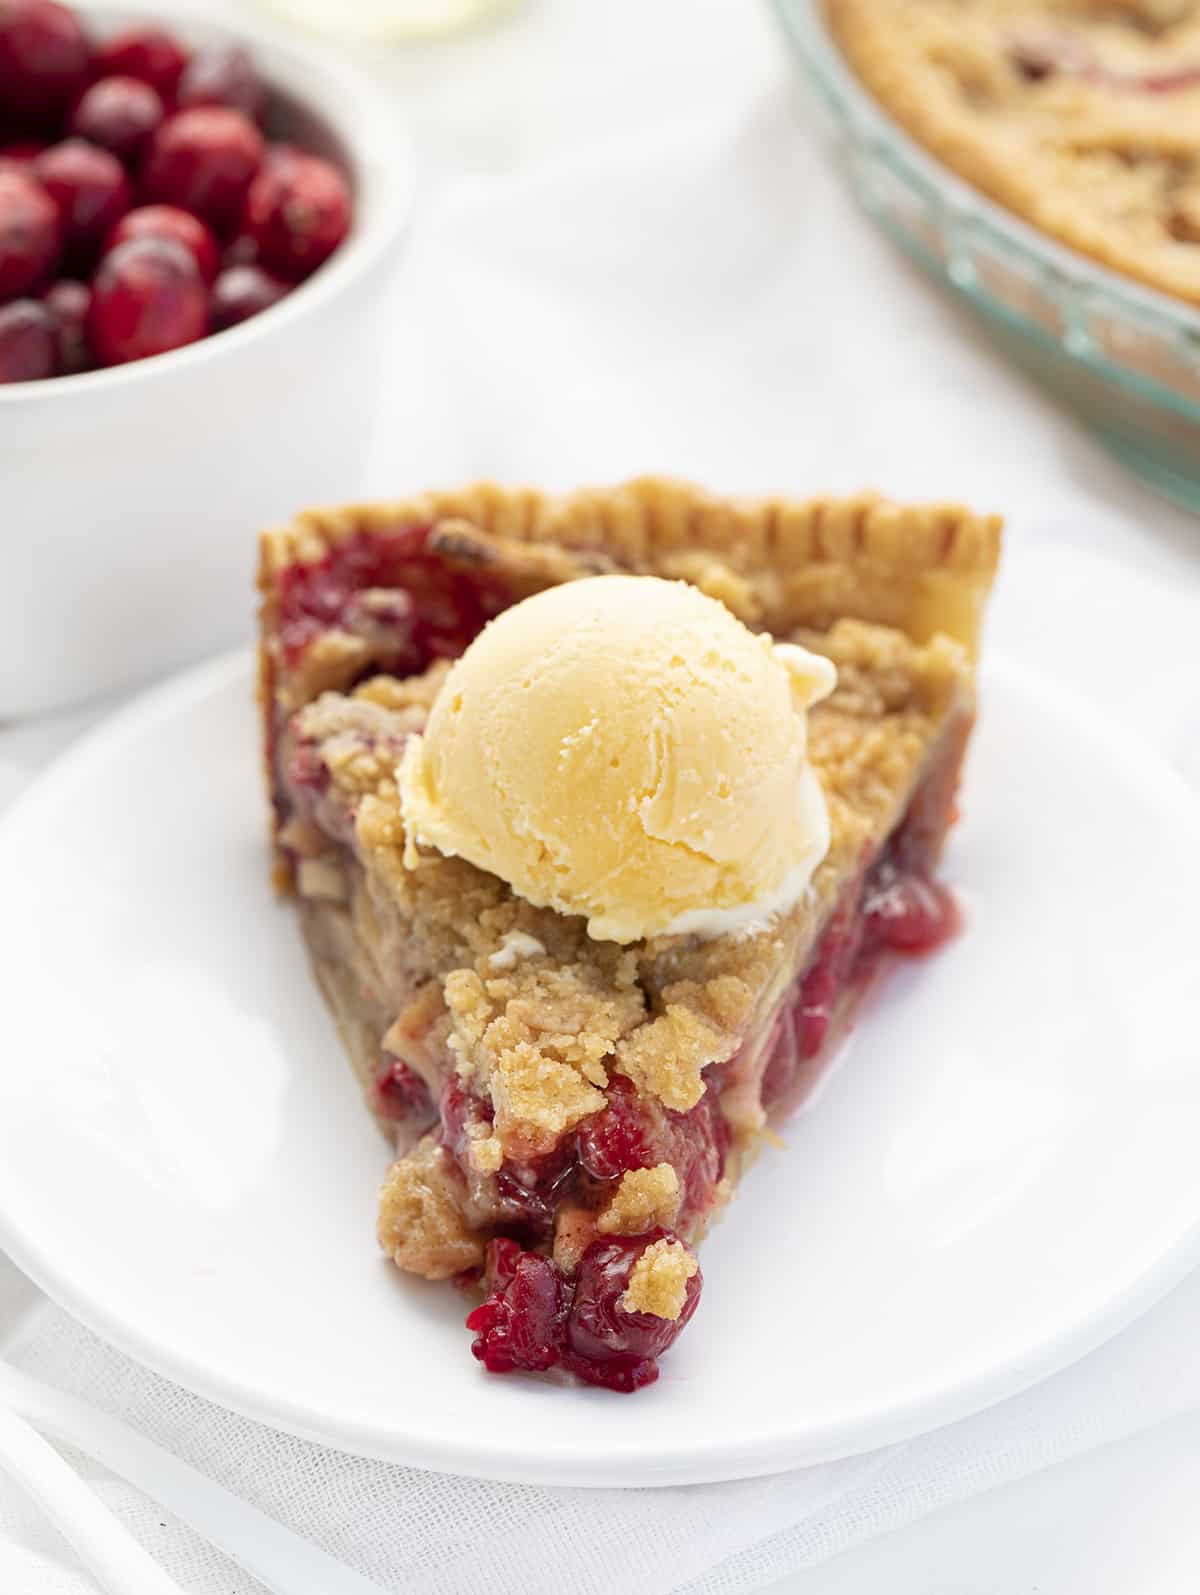 Slice of French Apple Cranberry Pie on a White PLate with Ice Cream and Cranberries in the Background. Dessert, Baking, Pies, French Pies, Cranberry Pie, Apple Pie, Crumble for Pie, Homemade Pie, Holiday Pie, Christmas Pie, Thanksgiving Pie, Thanksgiving Dessert, Christmas Dessert, i am baker, iambaker